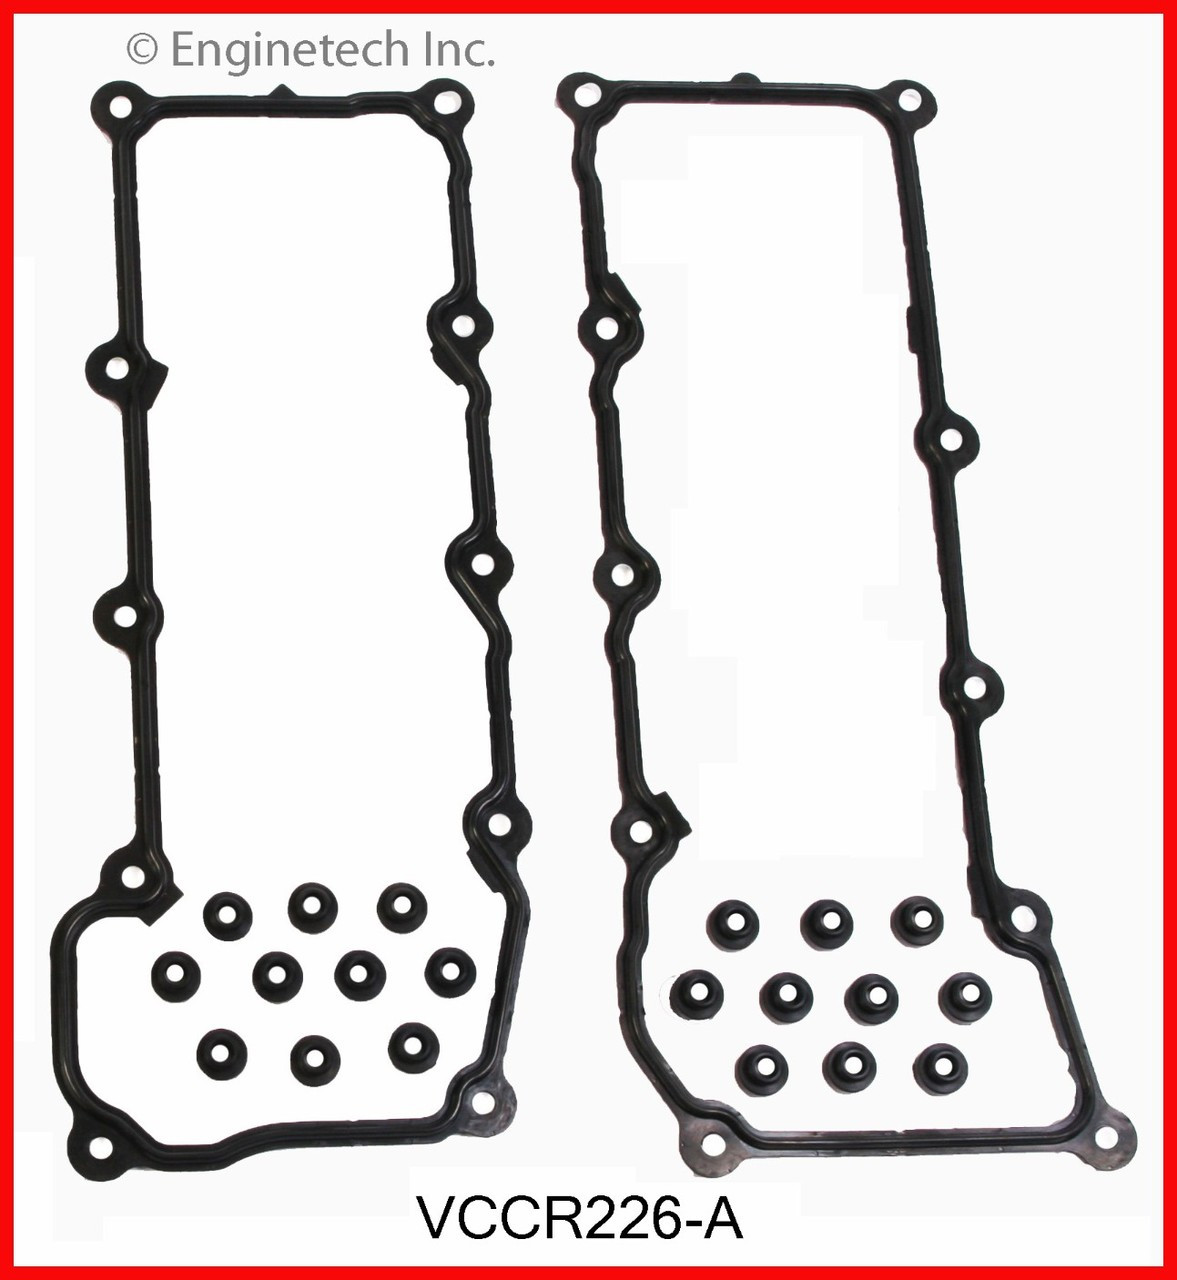 2003 Jeep Liberty 3.7L Engine Valve Cover Gasket VCCR226-A -4